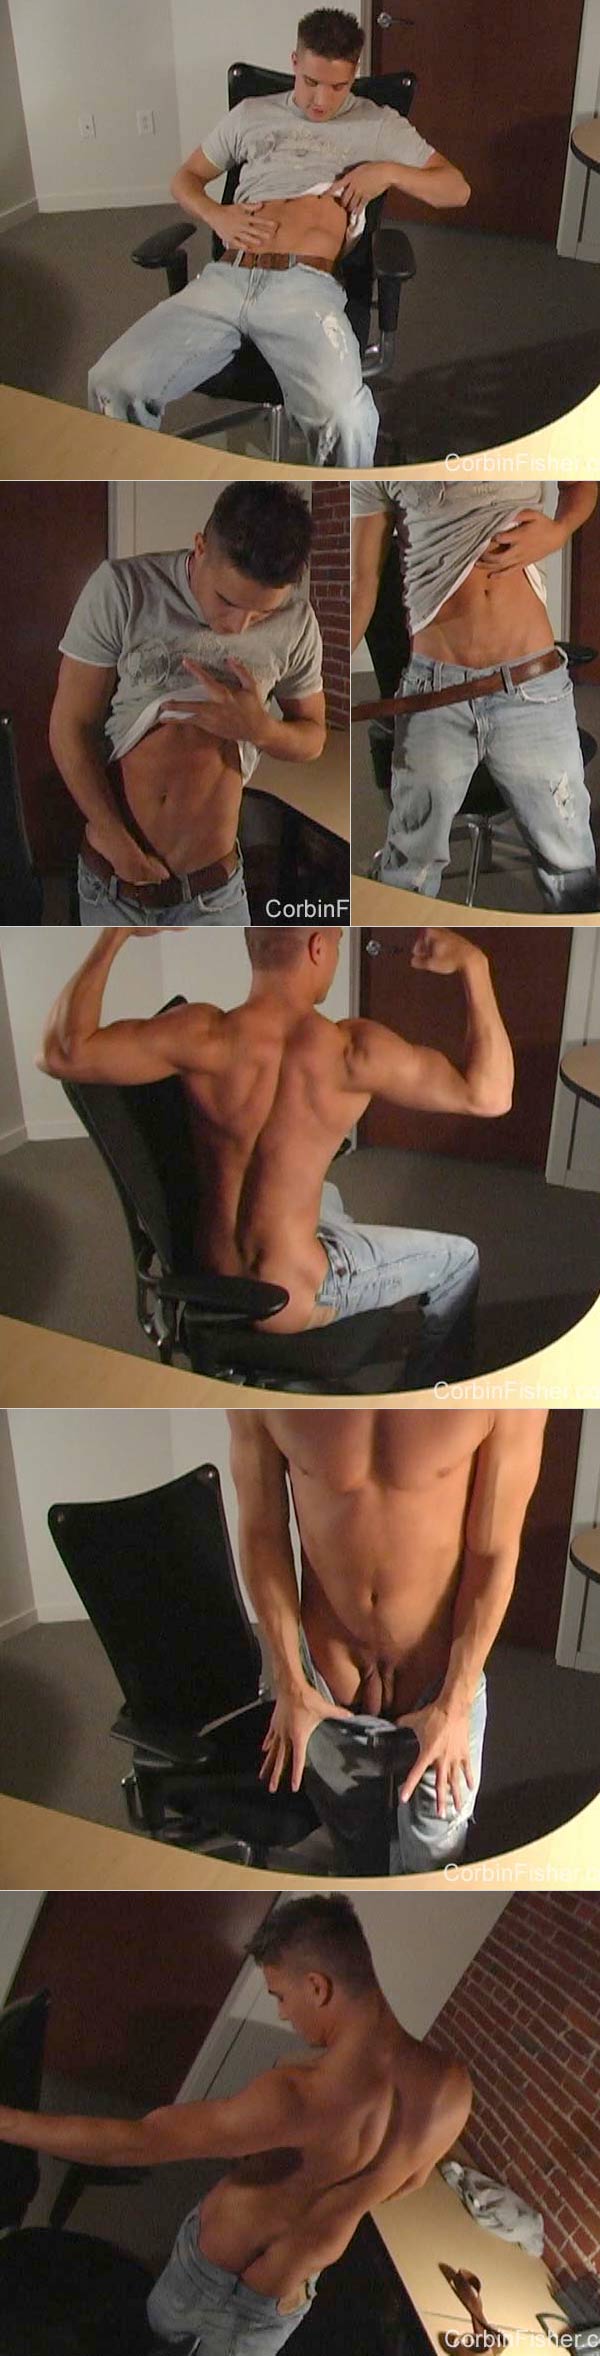 Jeremy's Audition at CorbinFisher